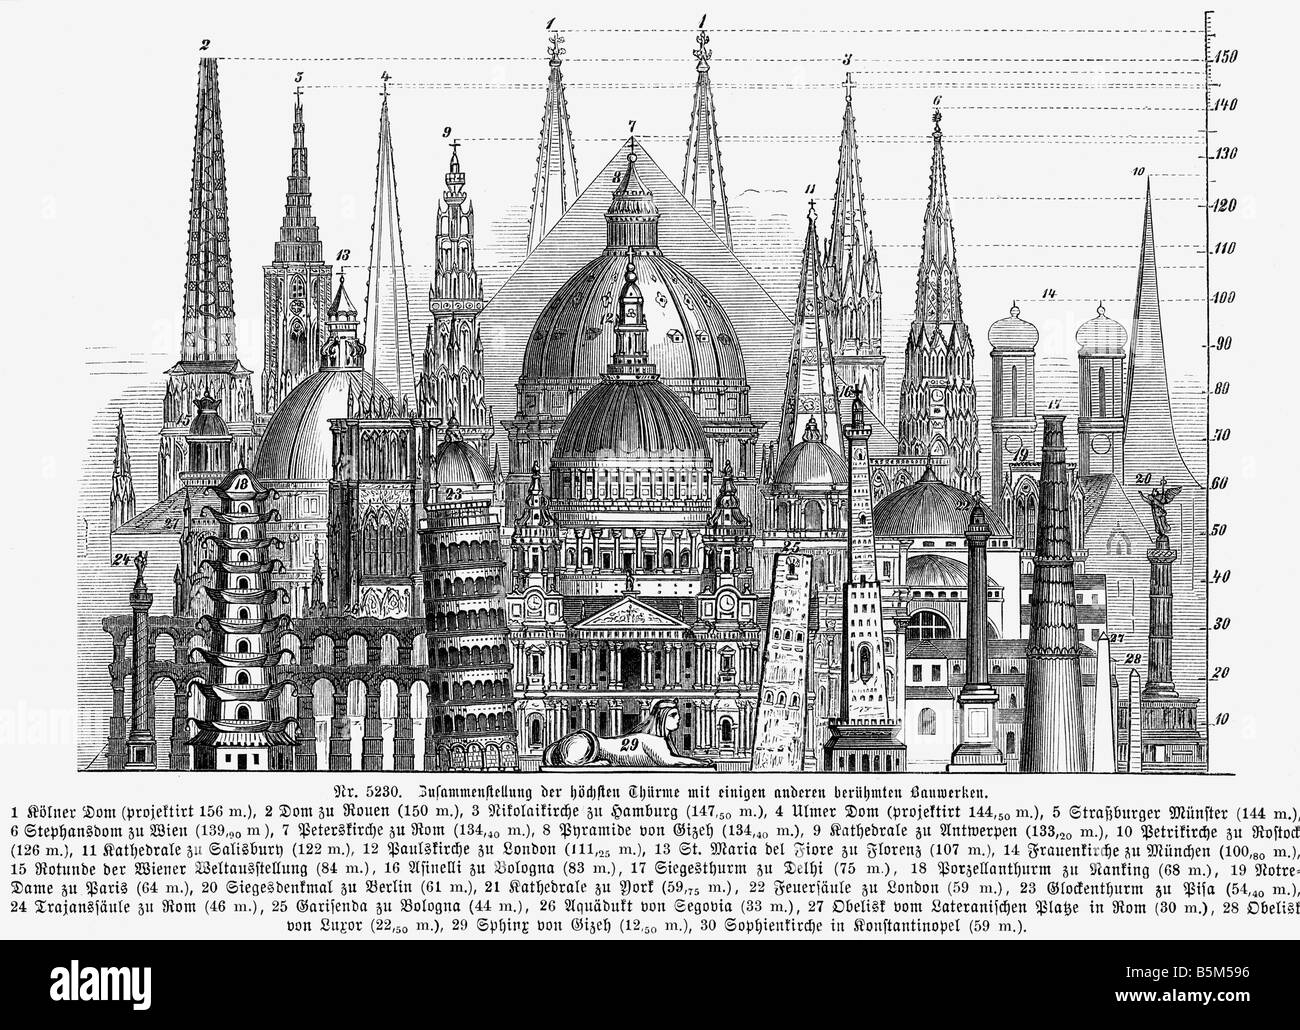 architecture, towers, comparison of the hightest towers, wood engraving, circa 1890, Stock Photo